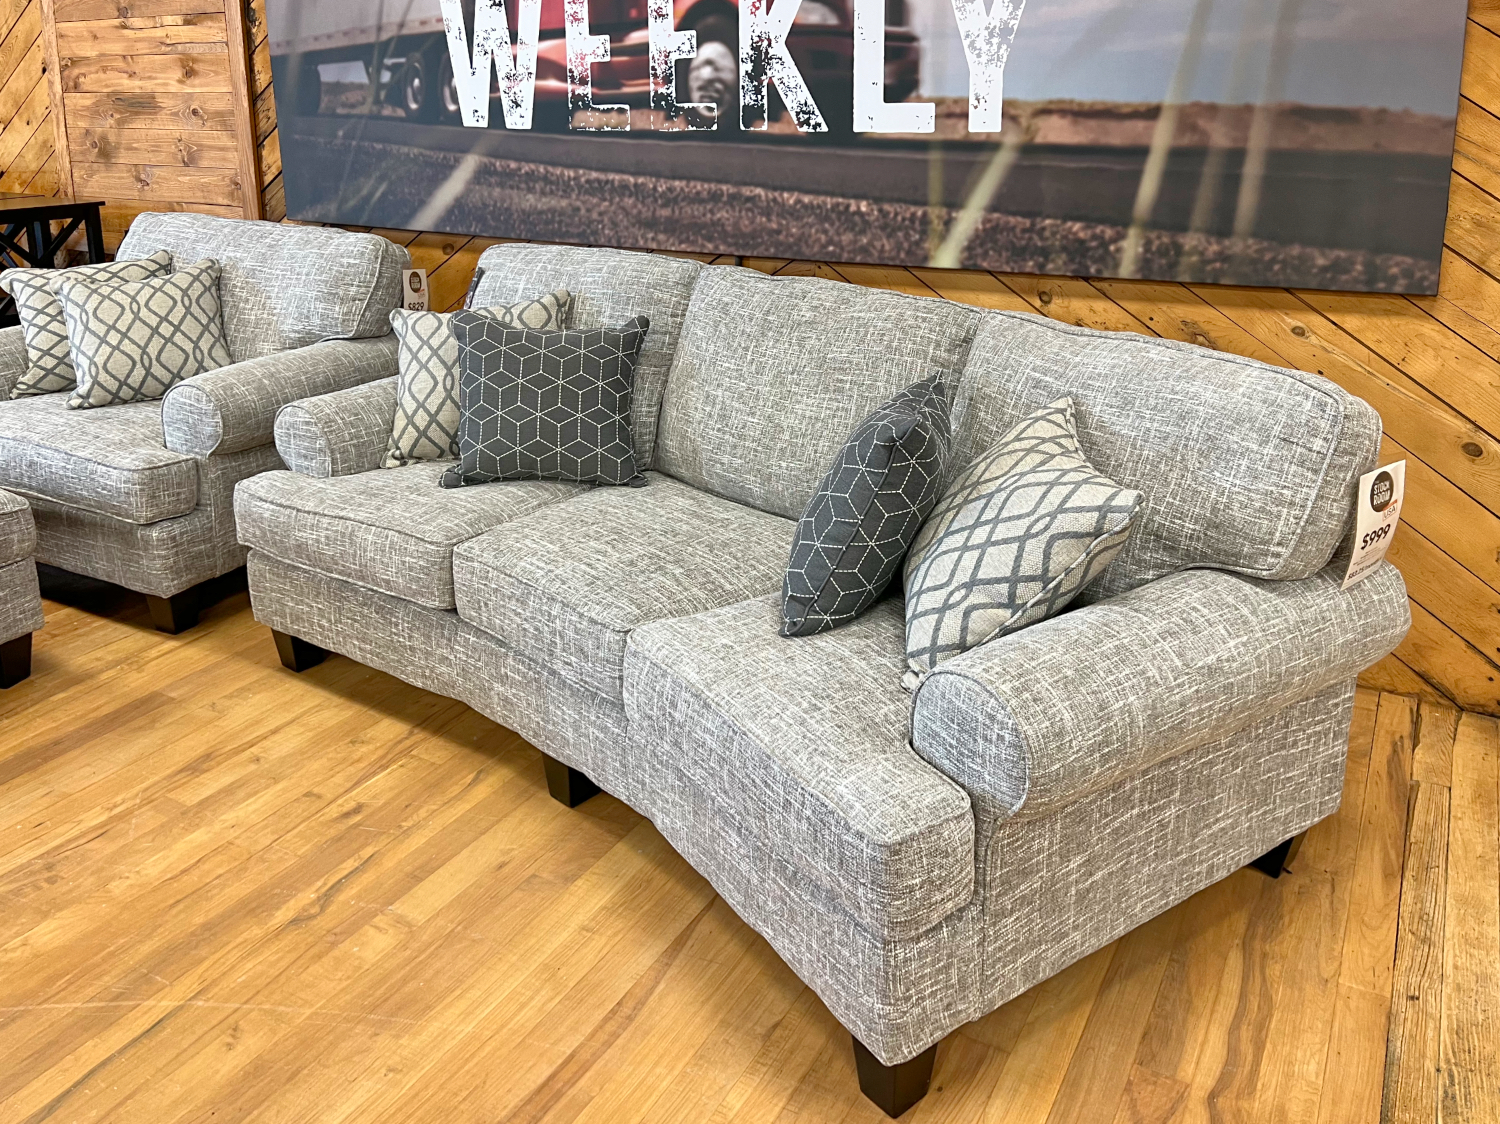 curved sofa in grey fabric in the stock room discount furniture warehouse in rockford, il